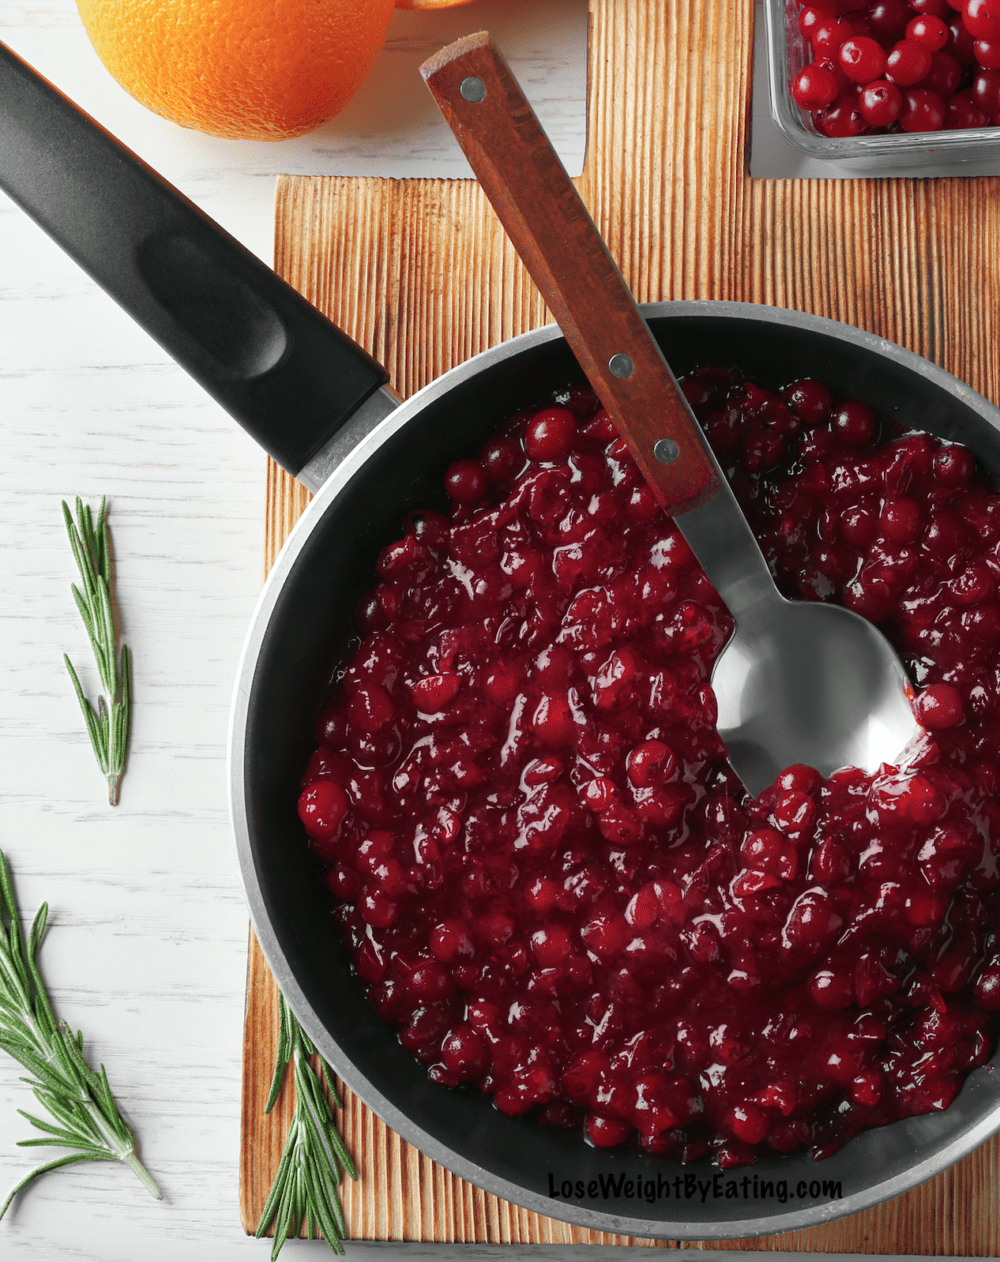 Homemade Cranberry Sauce Recipe The 20 Best Healthy Holiday Recipes